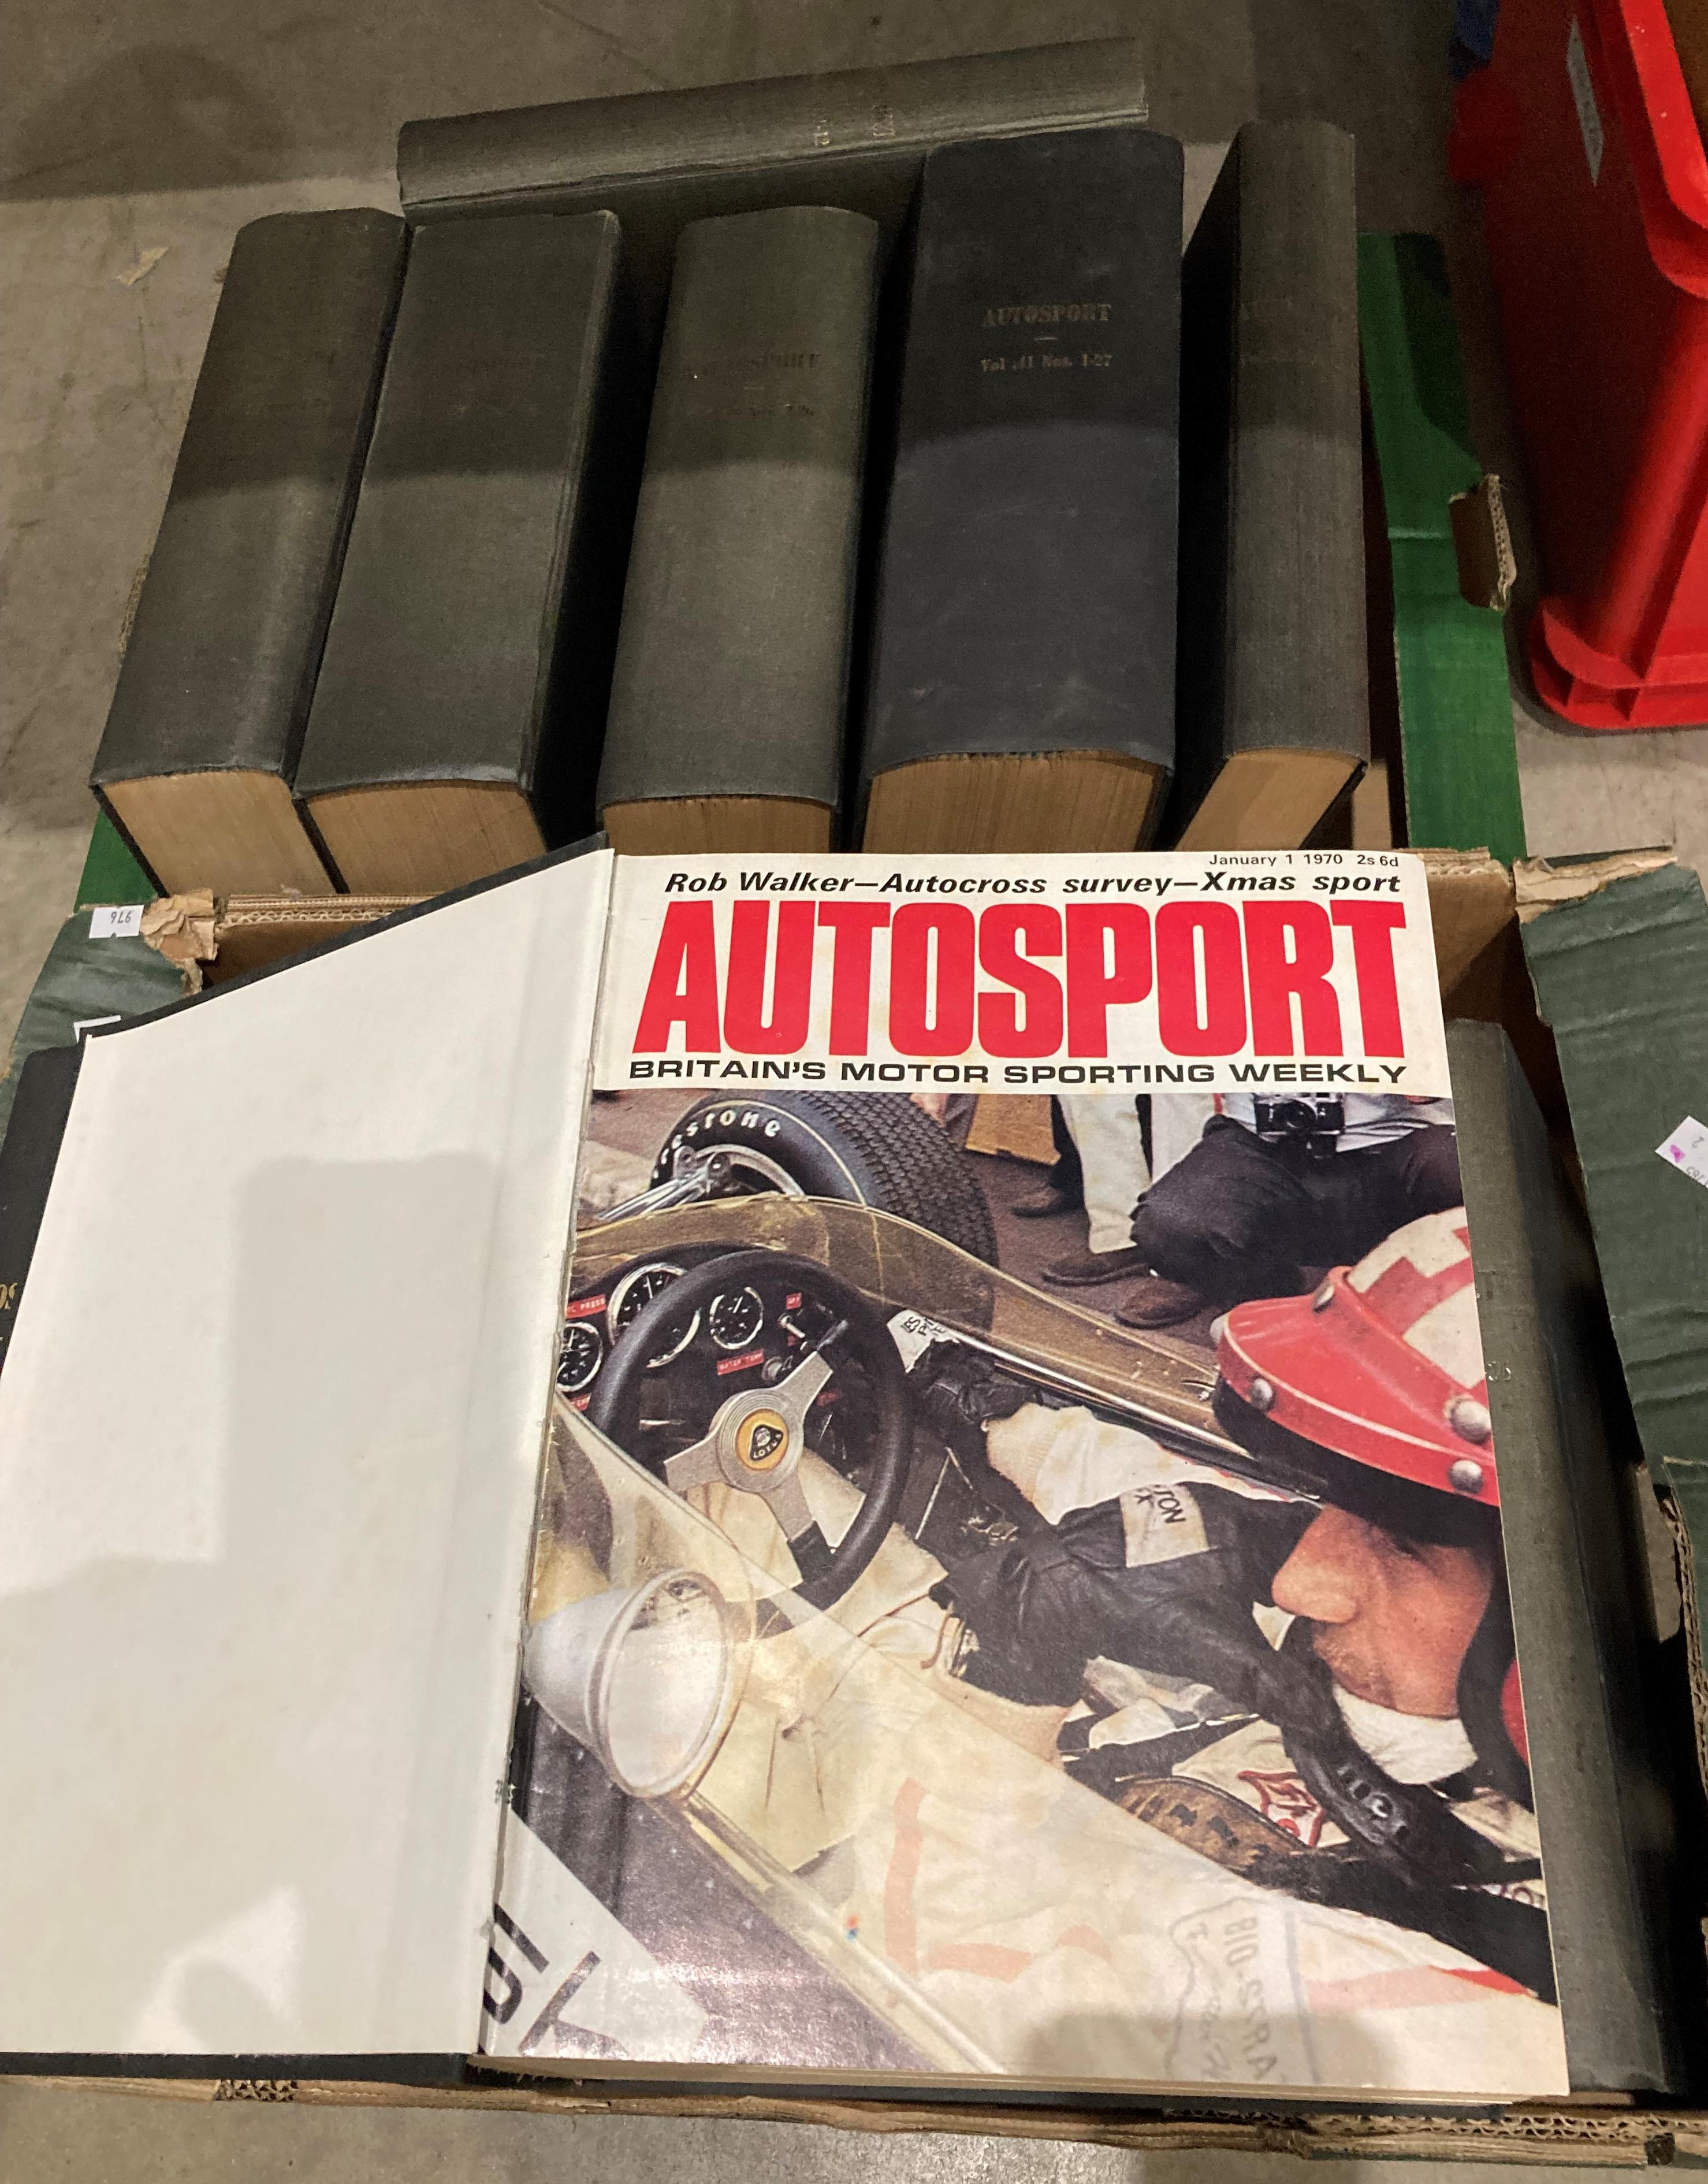 Contents to two boxes - 15 bound copies of Autosport Magazine from Vol 26 Nos 1-26 starting January - Image 3 of 3